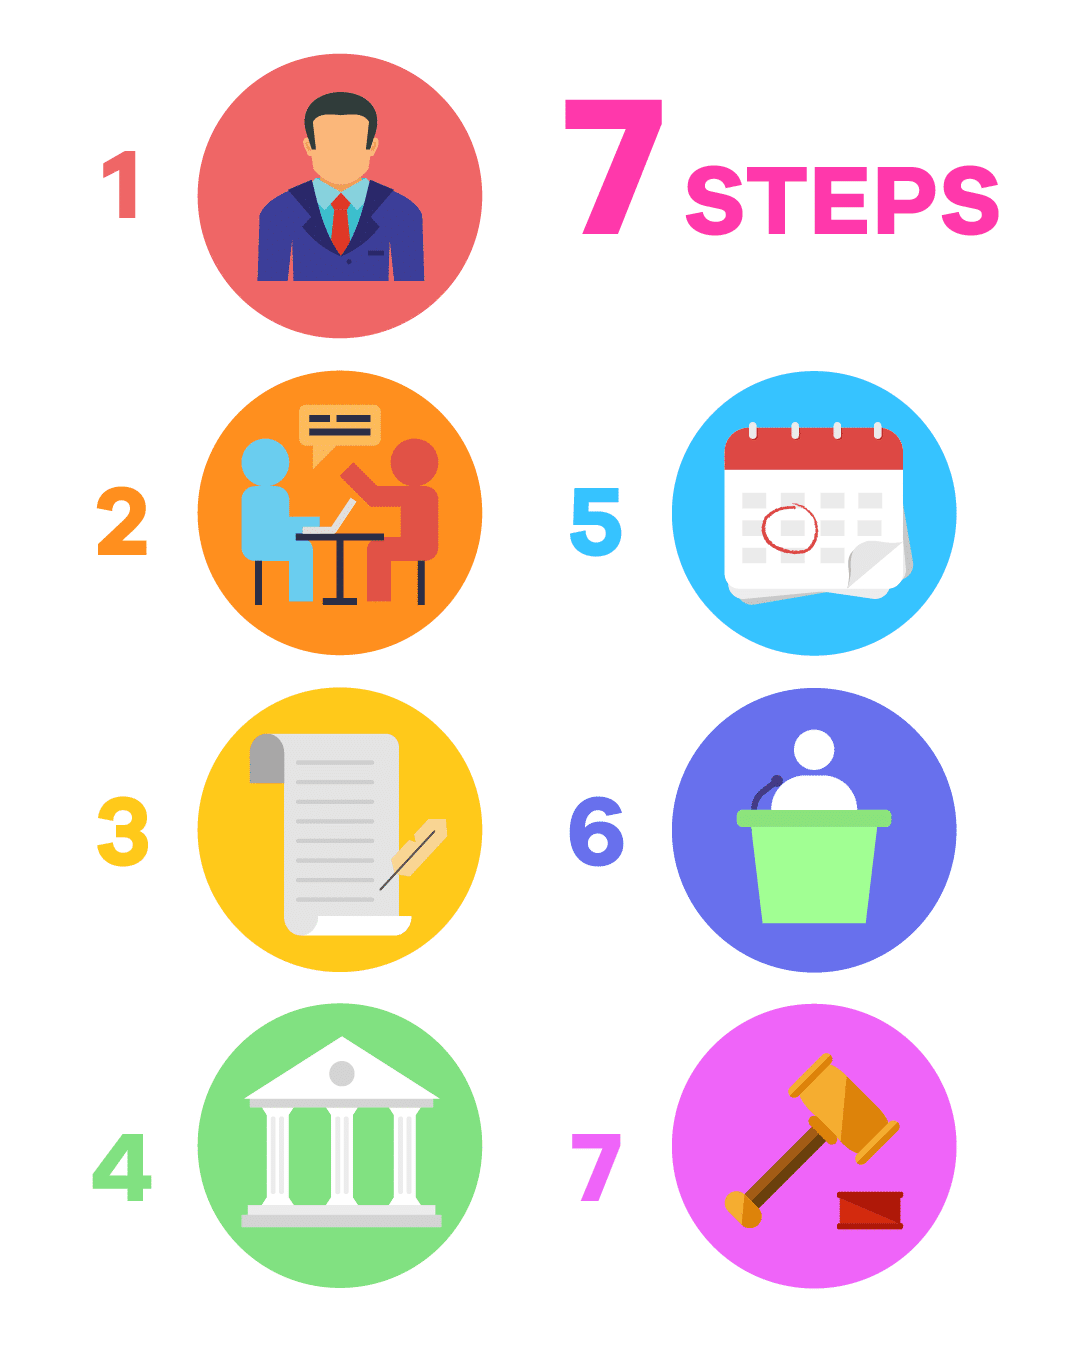 Infographic discussing the 7 steps to Annulment.